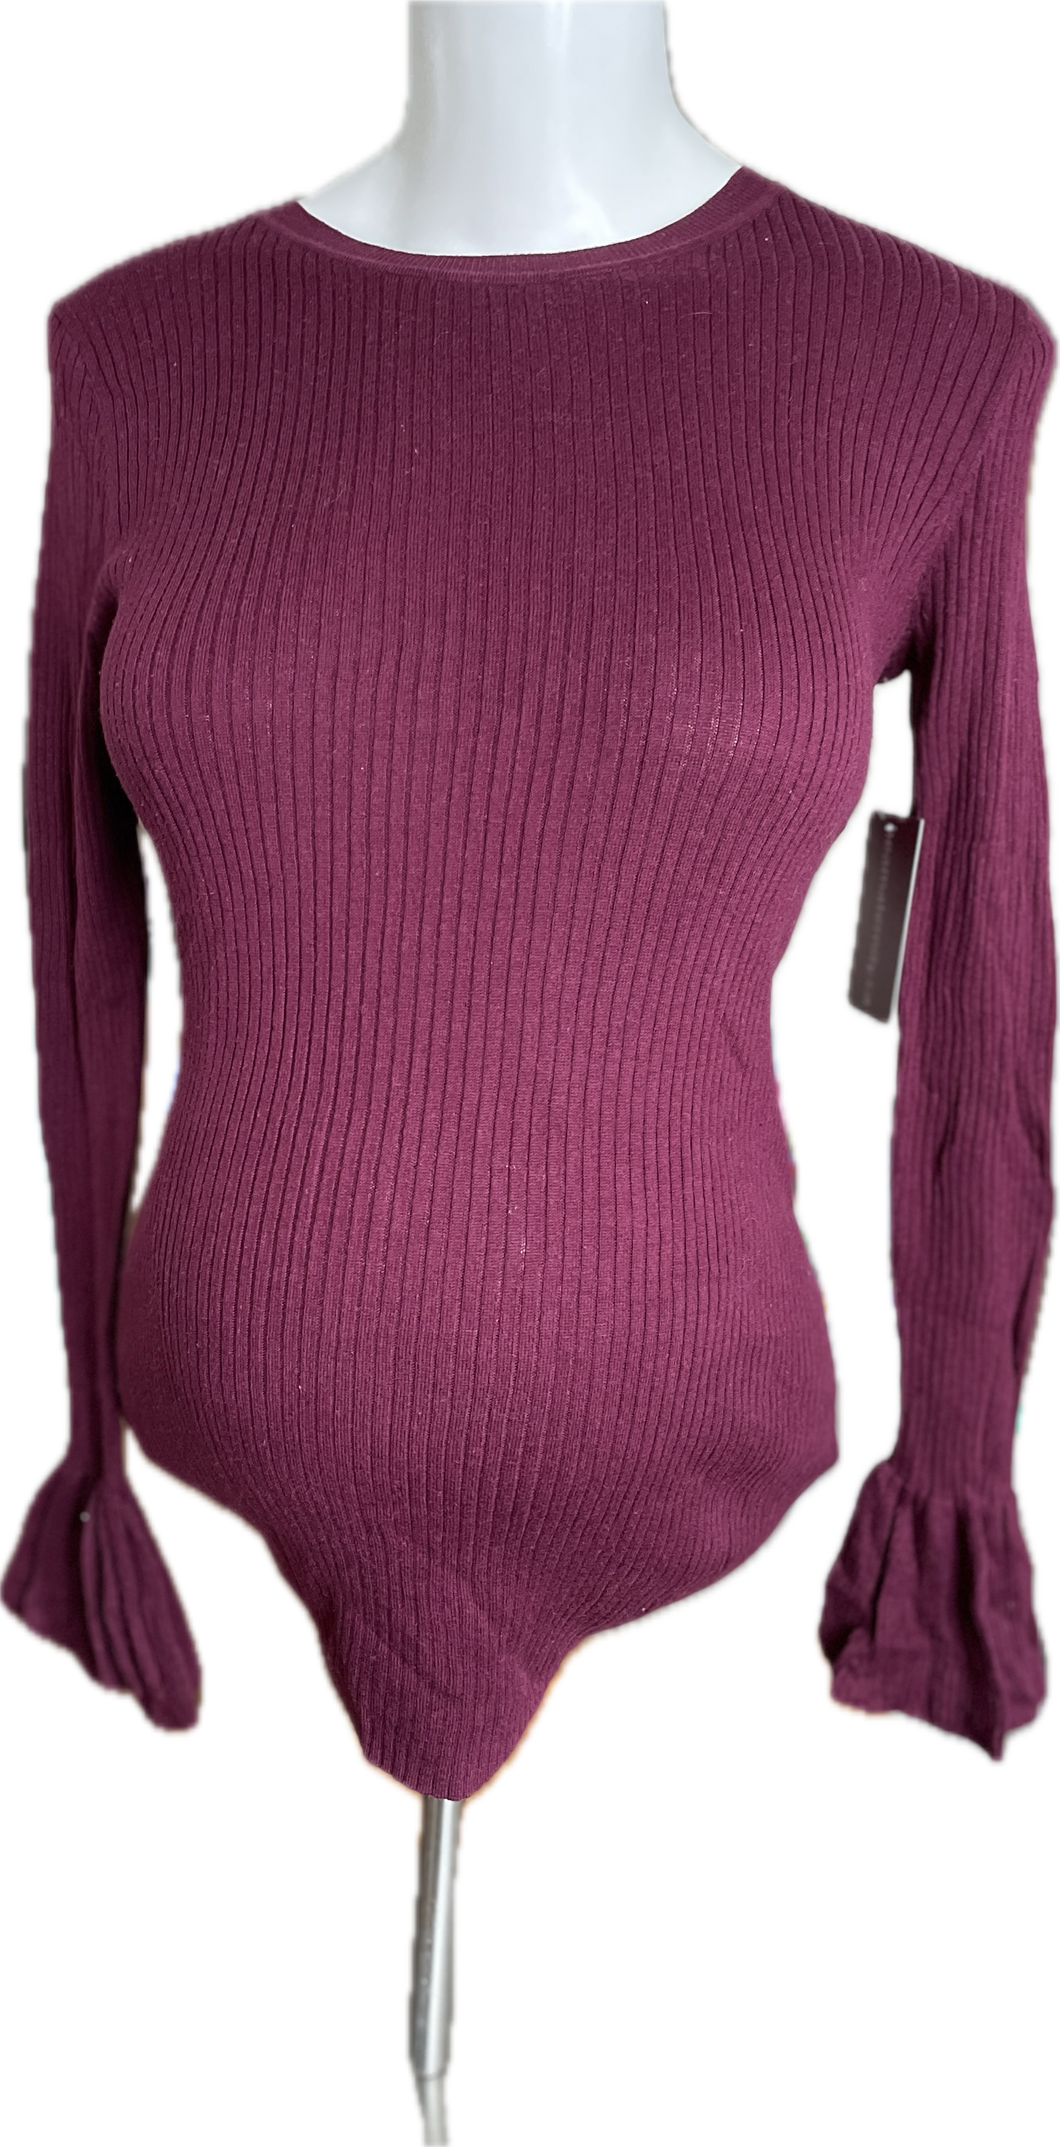 CLEARANCE S Gap Maternity Sweater in Raspberry